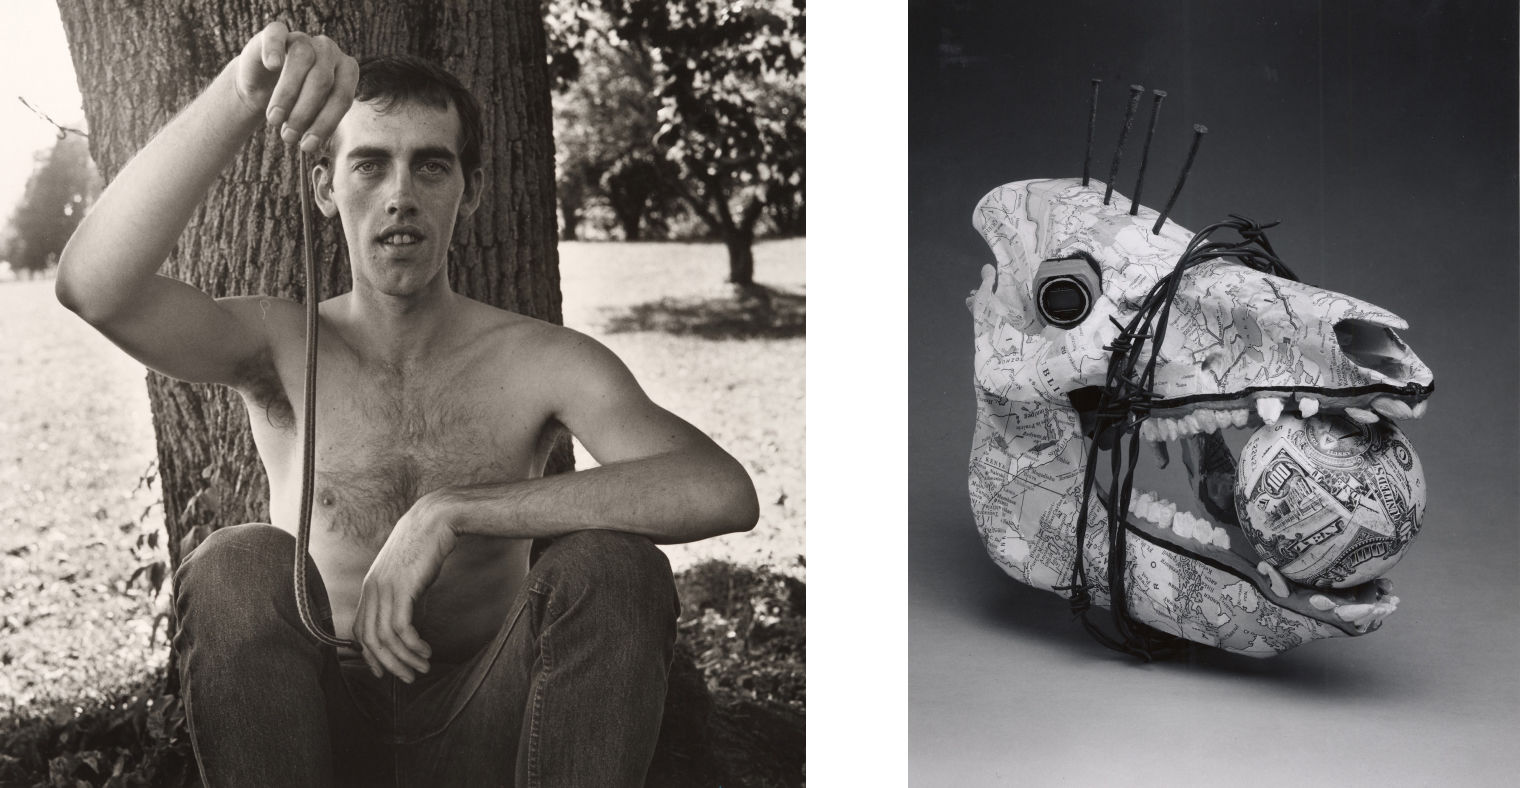 On the left, a black and white photograph of the artist David Wojnarowicz seated shirtless against a tree trunk holding up and dangling a small snake; on the right, a black and white studio photograph of an animalistic bone skull sculpture made with papier-mâché using typographic maps; the skull jaw is bound in barbed wire and. holds a sphere papier-mâchéd with paper currency.